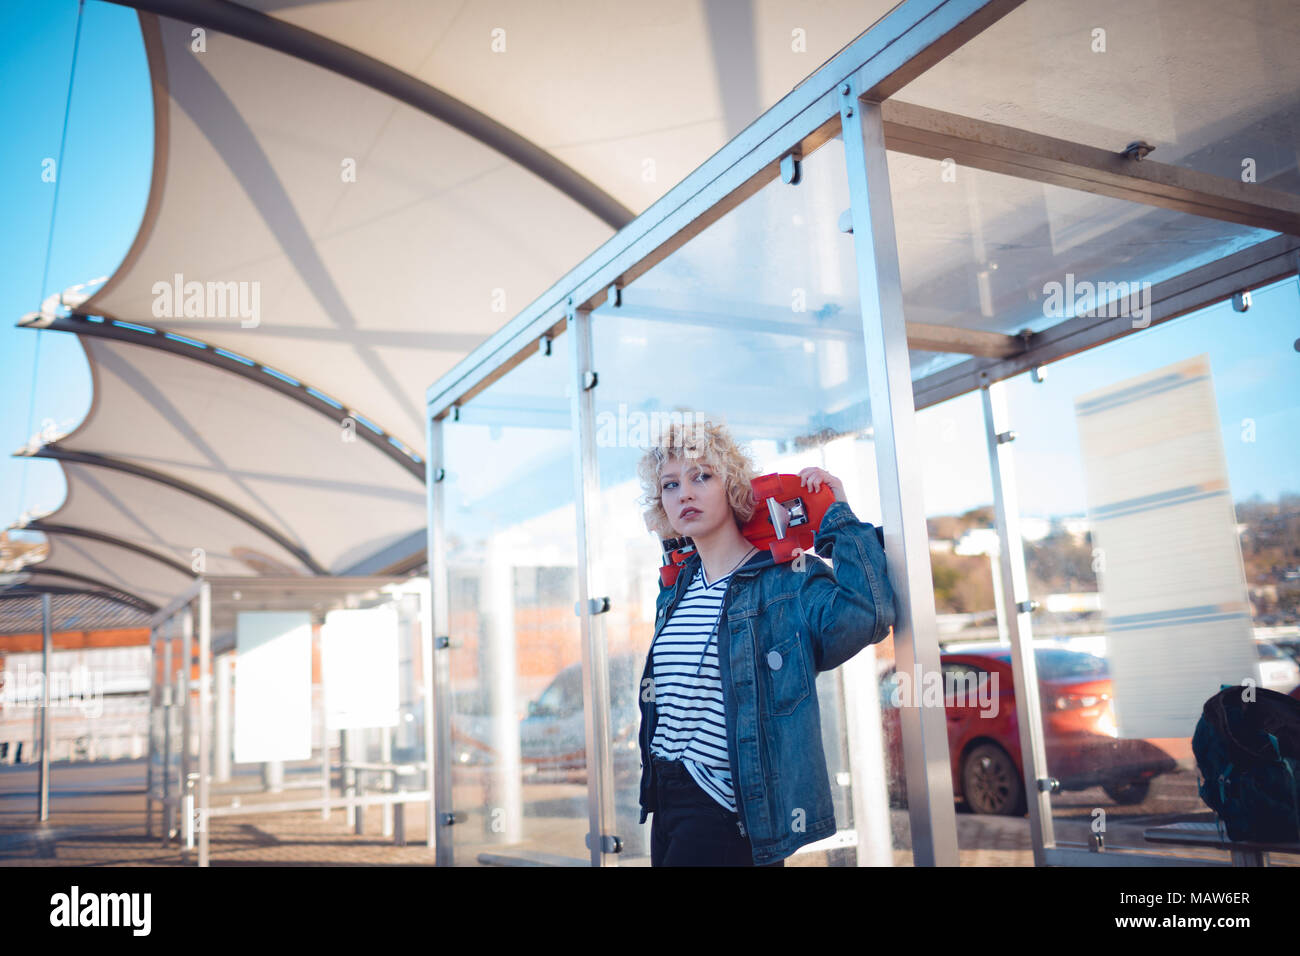 Woman holding skateboard at bus stop Banque D'Images